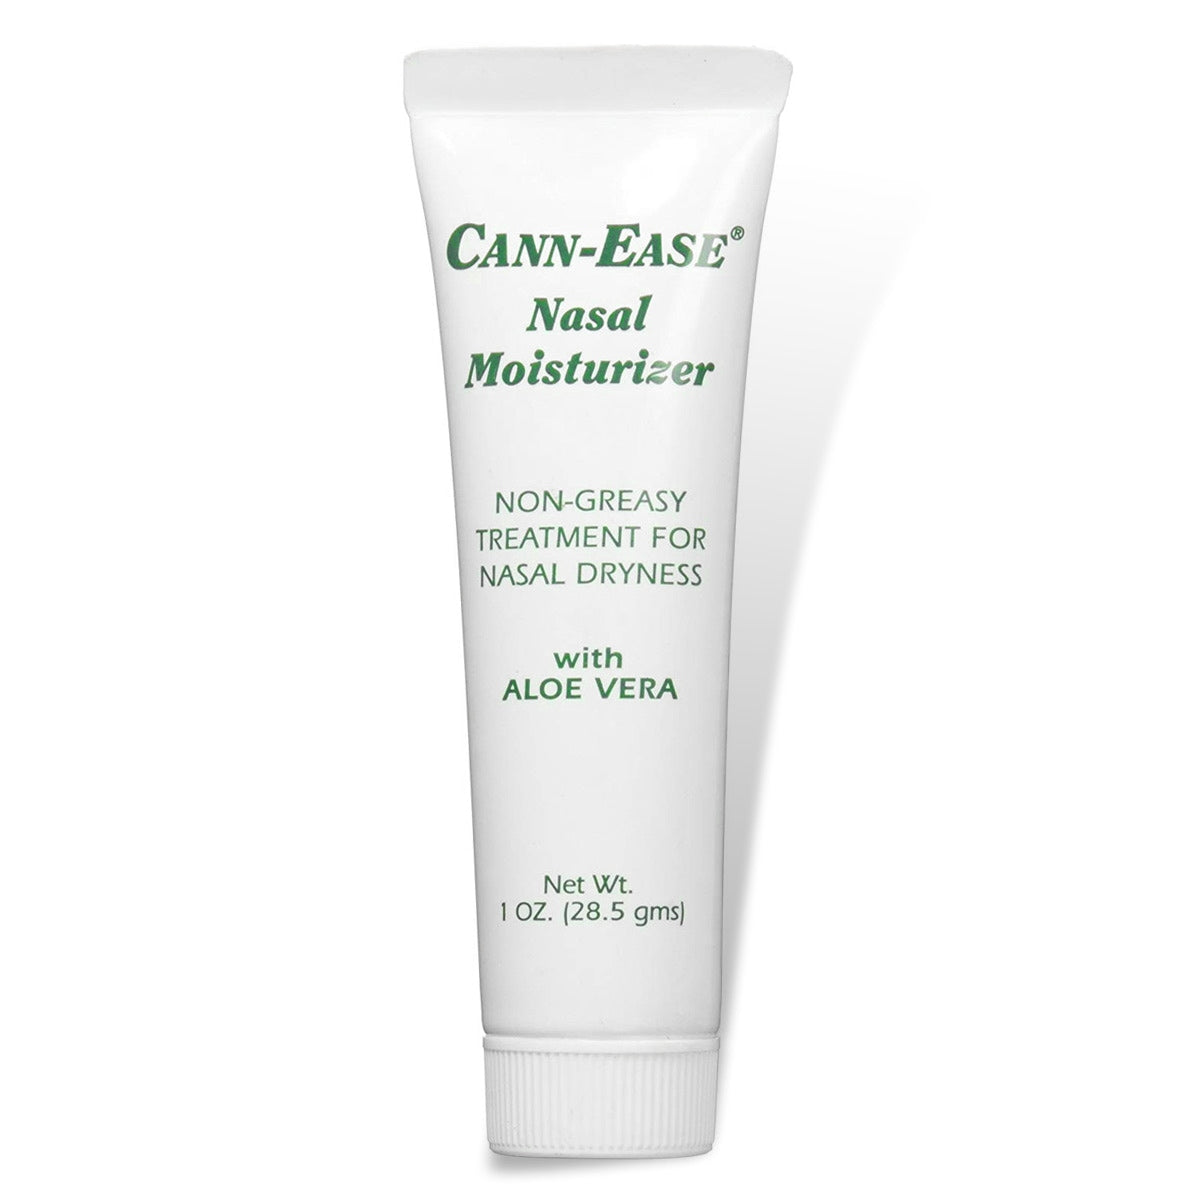 Cann-Ease Nasal Moisturizer Skin Cream with Aloe Vera for Oxygen Therapy